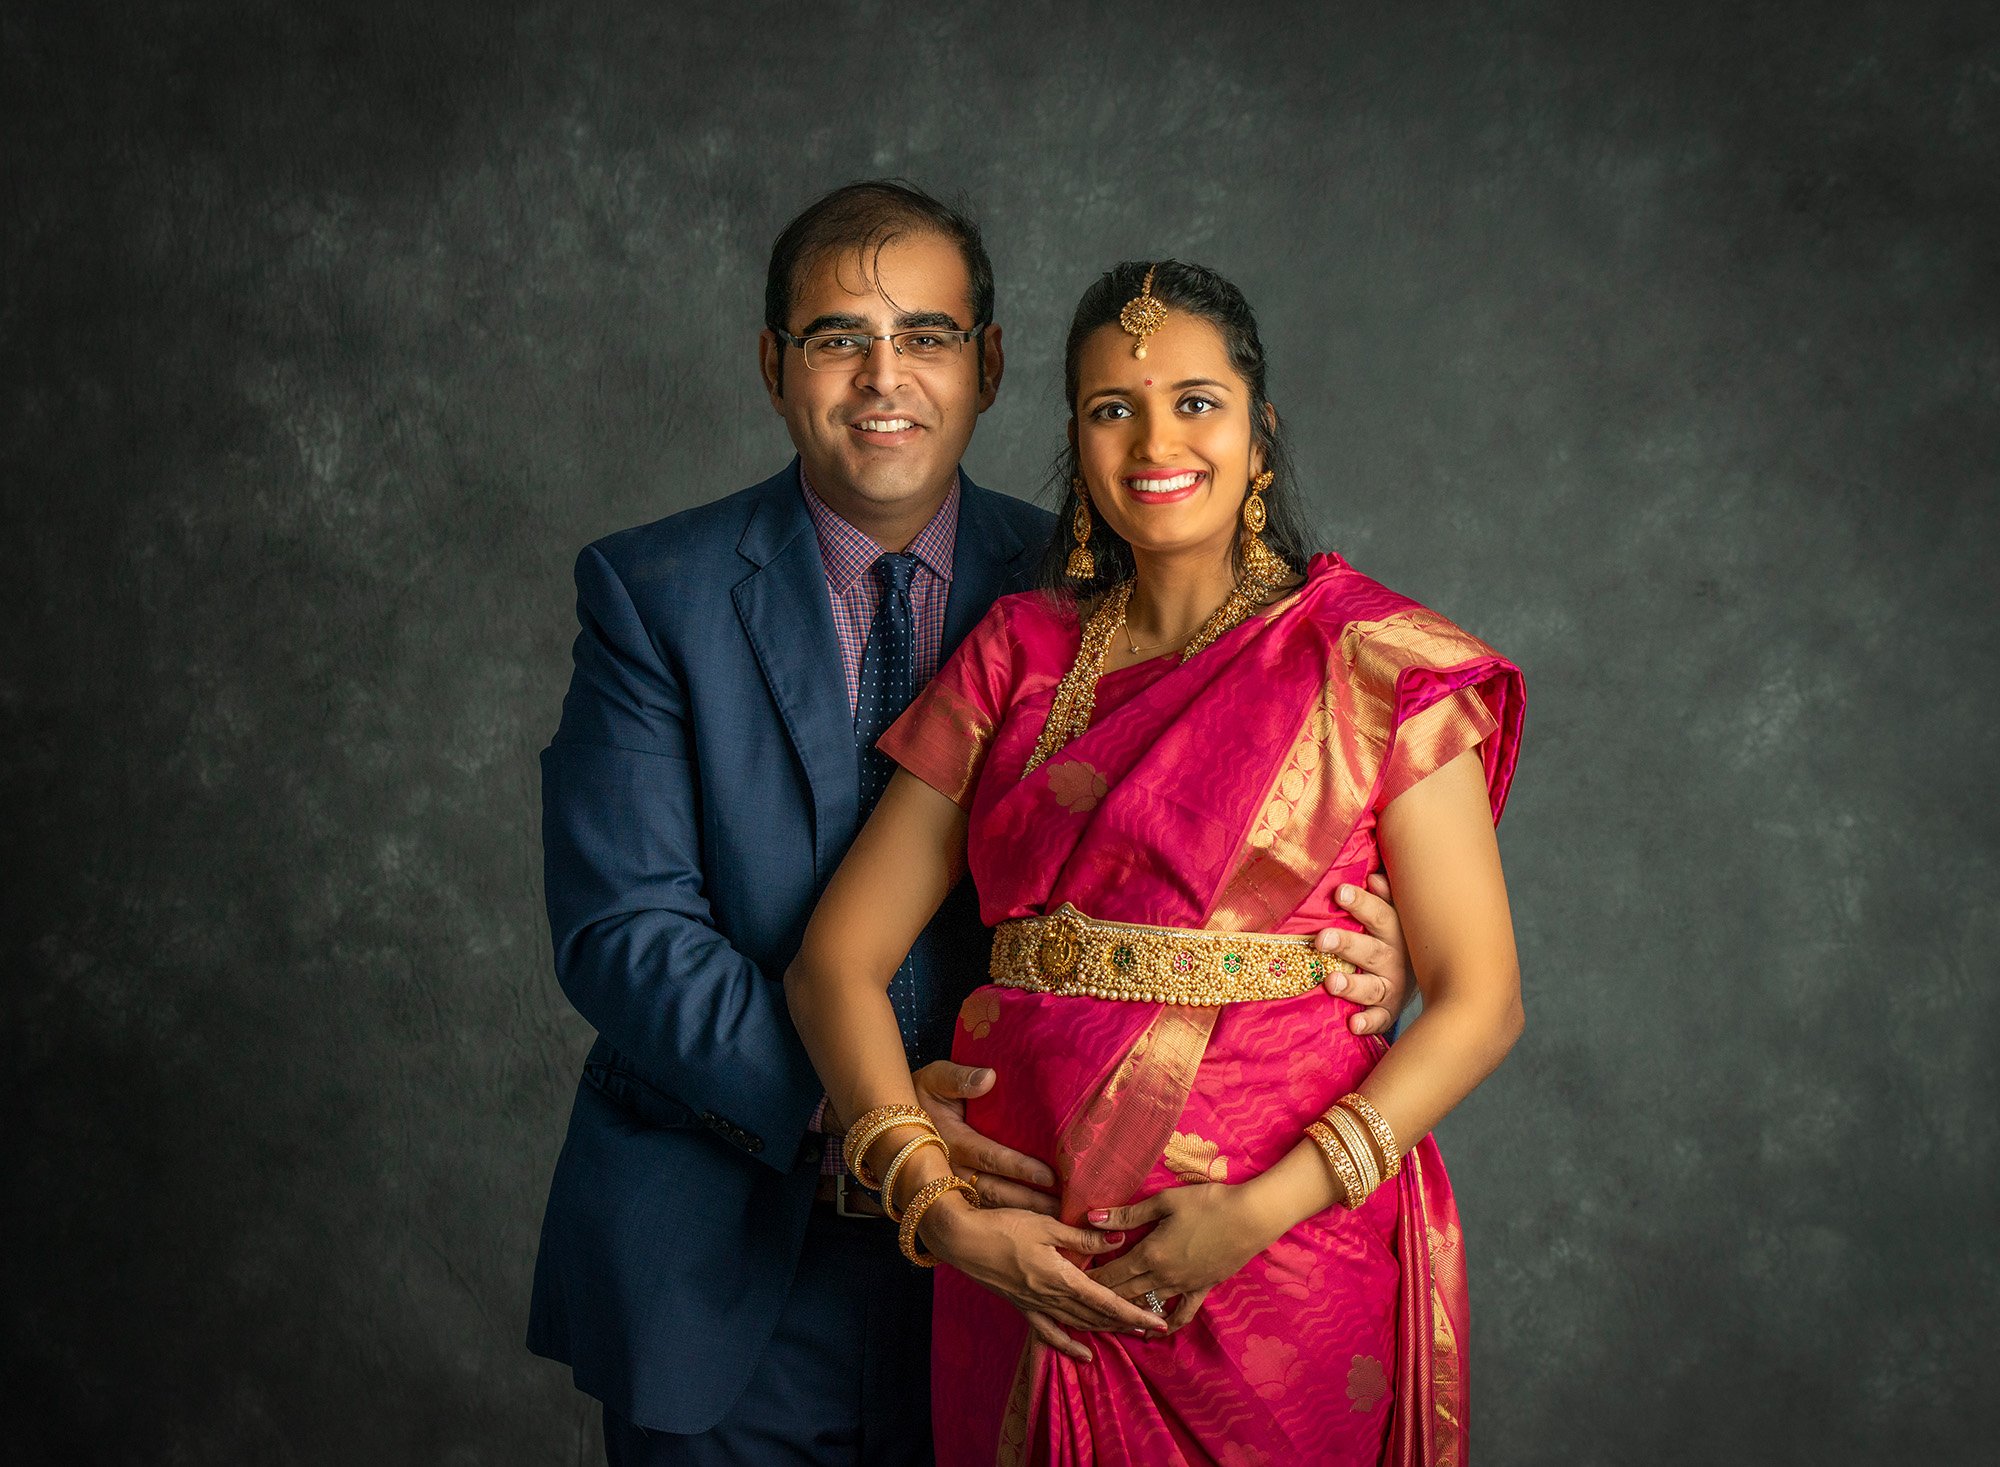 pregnant woman posing with husband in traditional costume